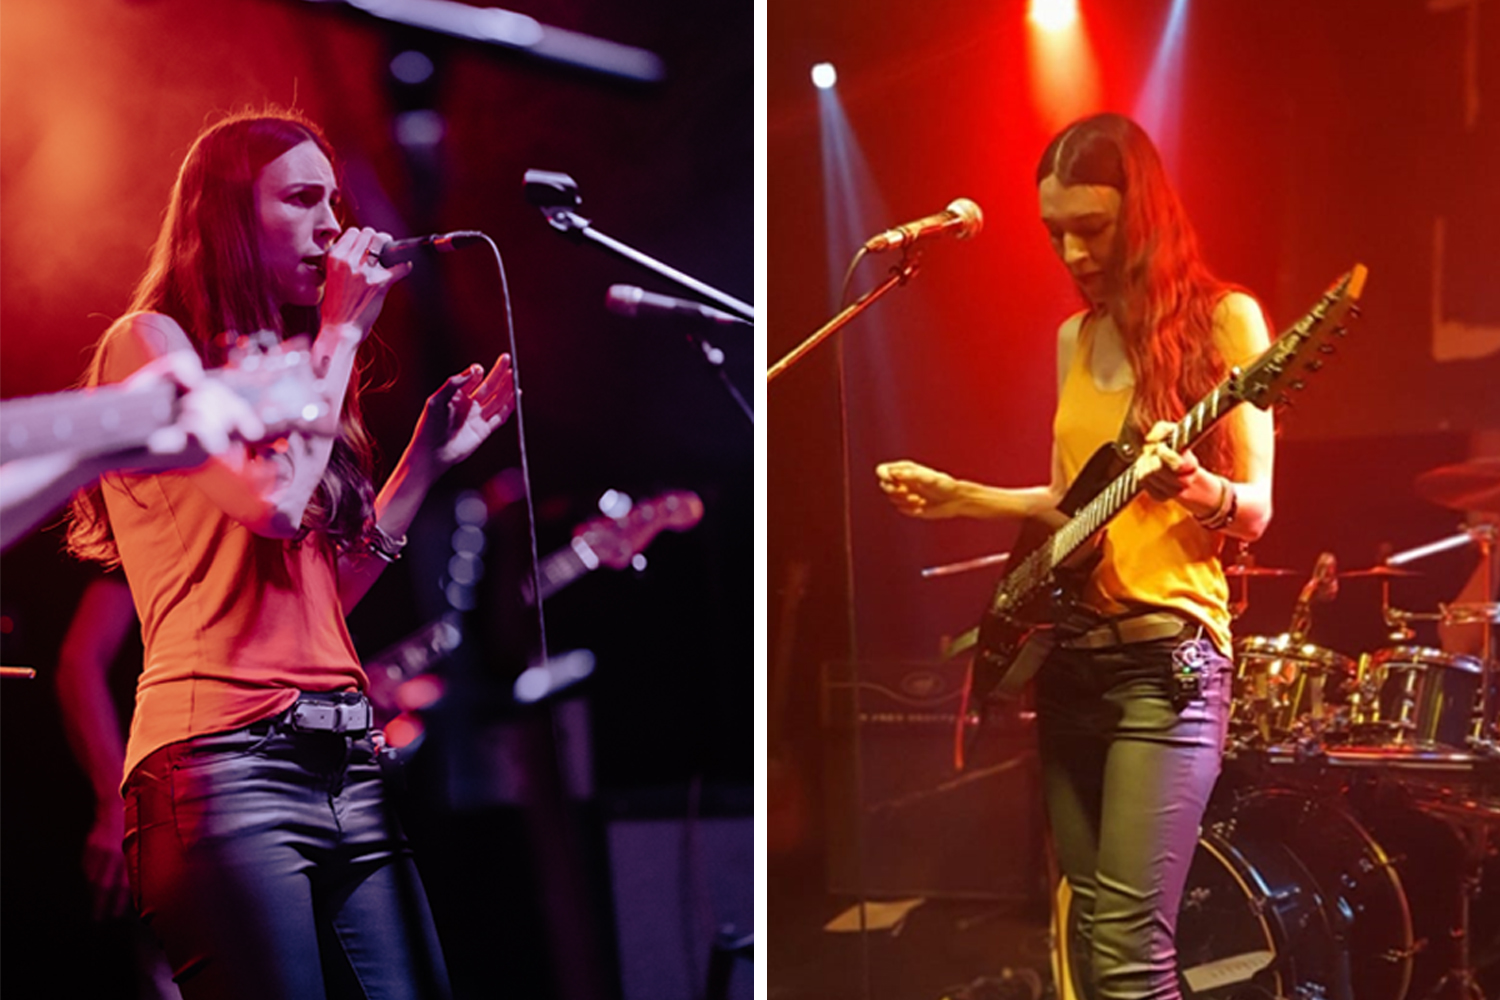 These photos from the concert illustrate the difference between professional photography (left) and a mobile phone snapshot (right). | Photo: Radim Krumpolc, Nikola Ramešová